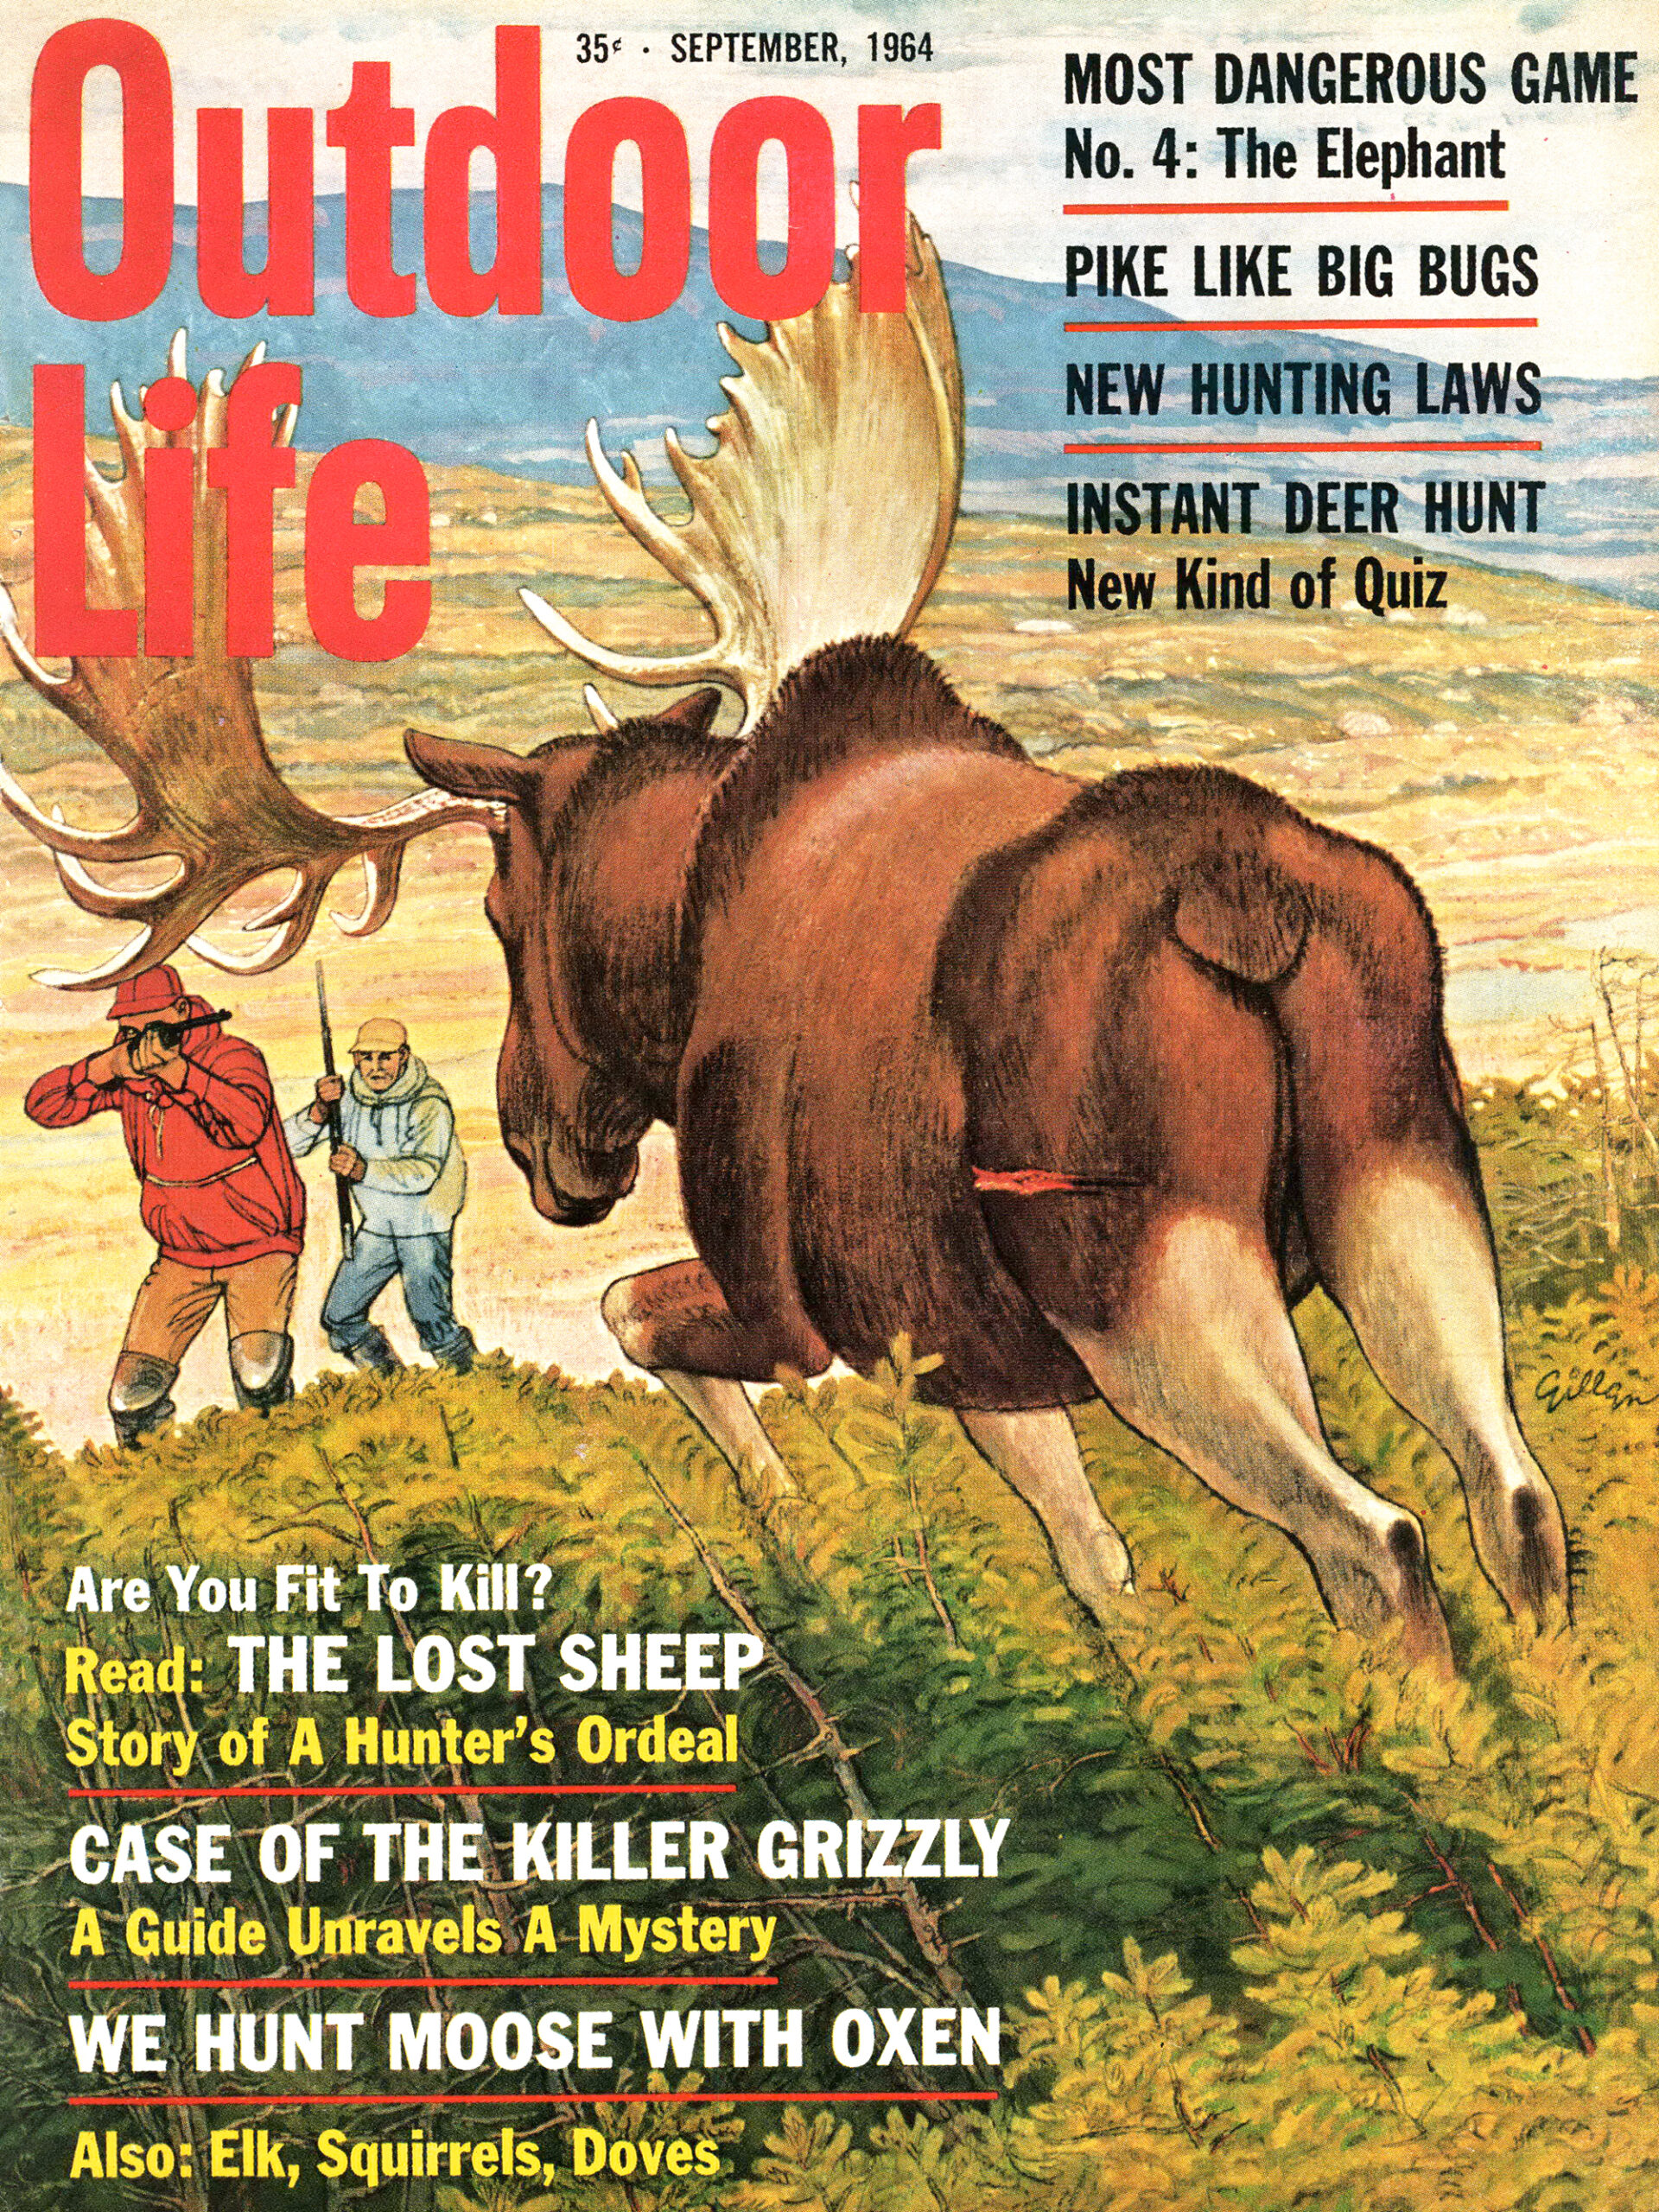 The cover of the September 1964 issue, with a painting by Denver Gillen.